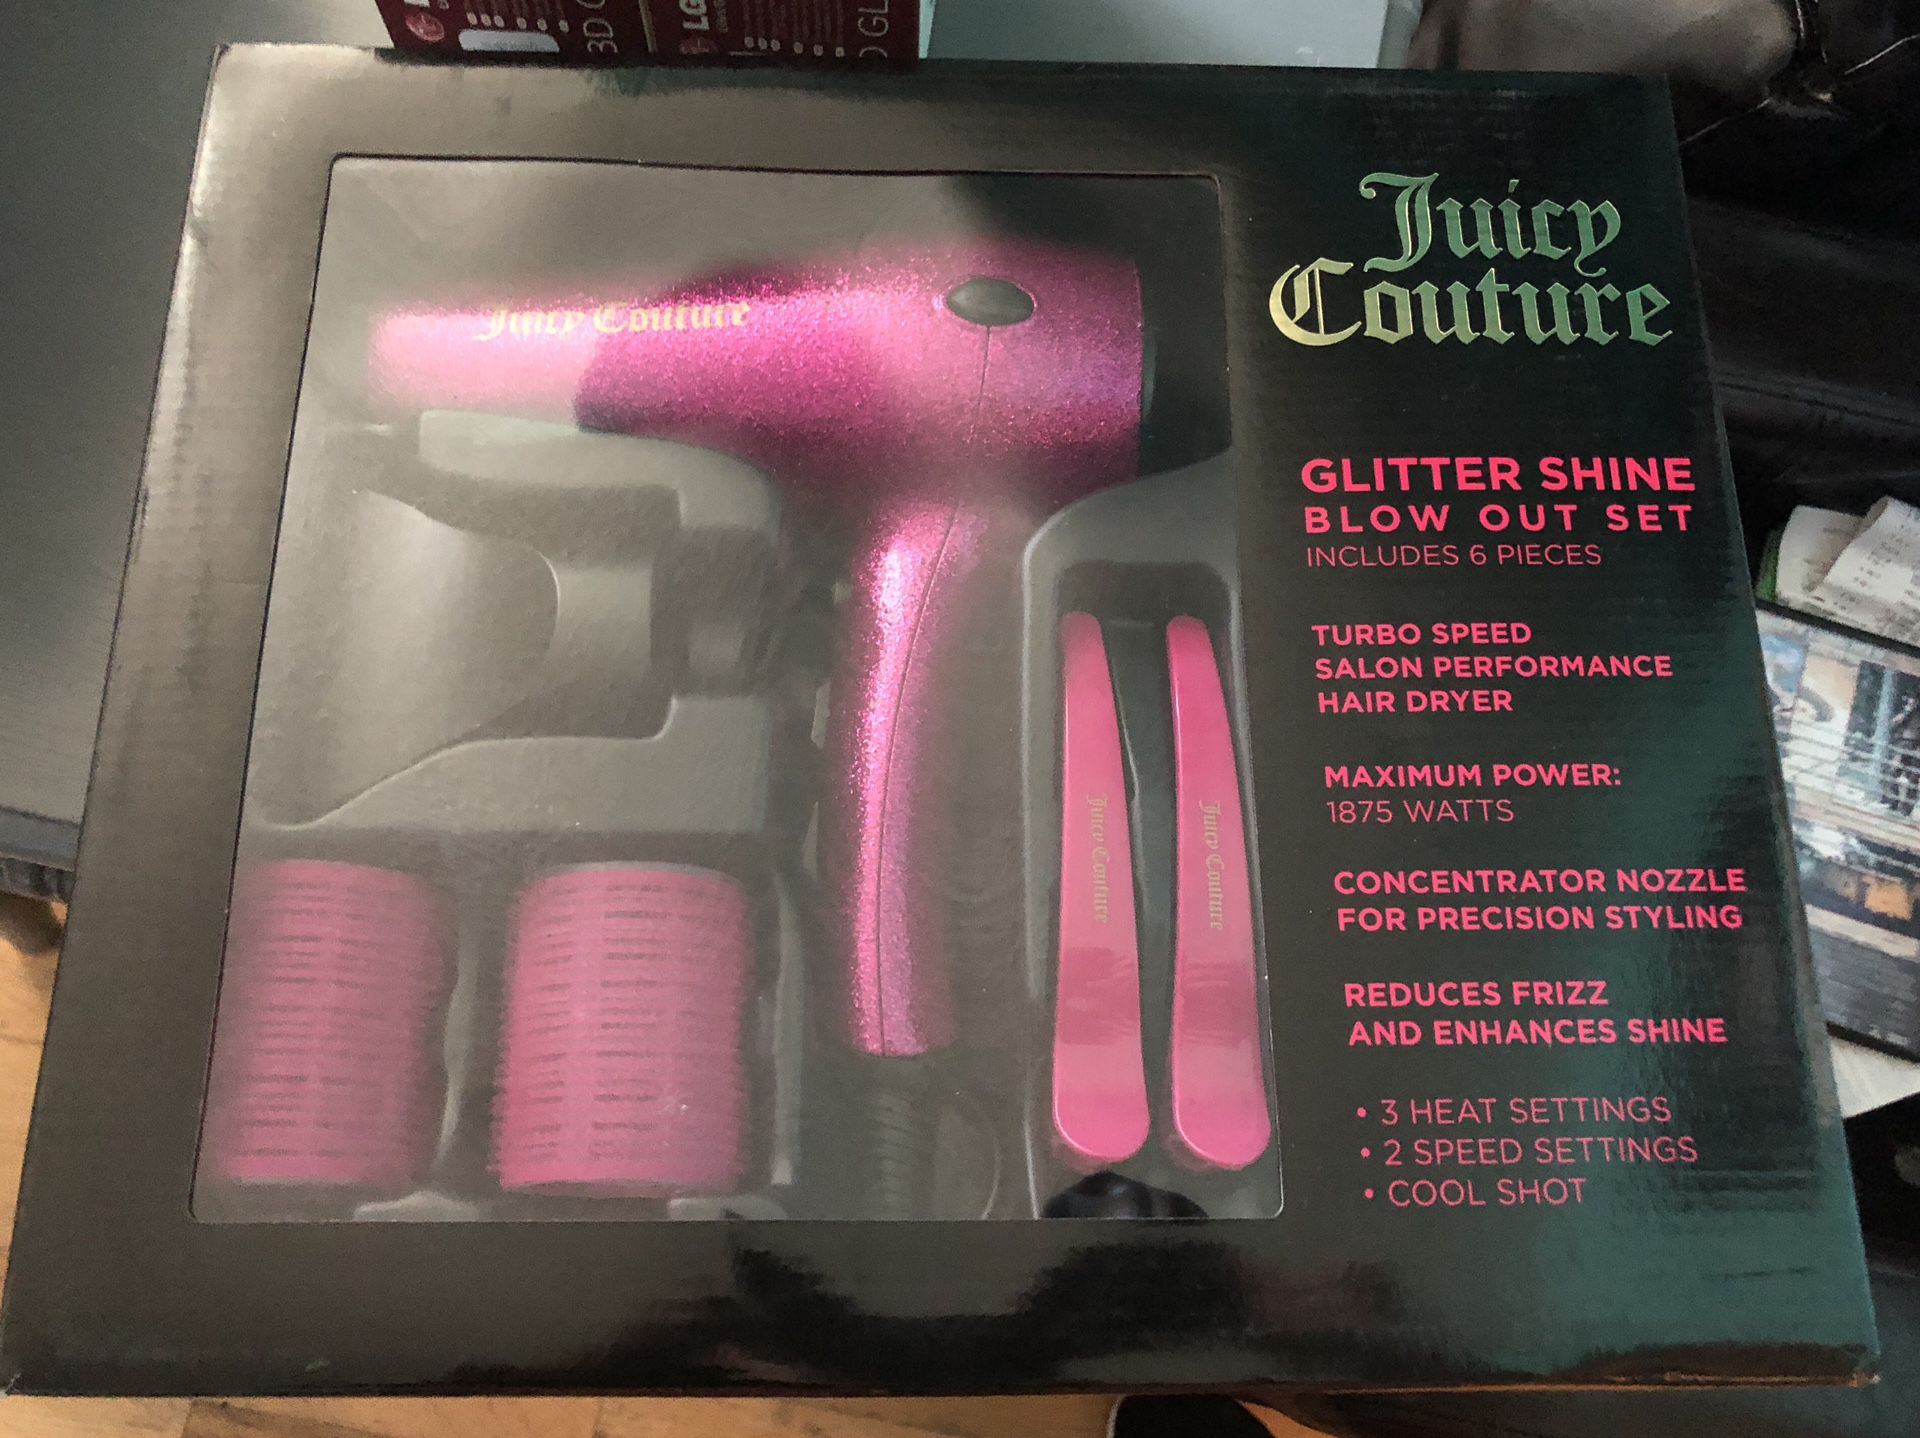 Juicy Couture Blow Out Set